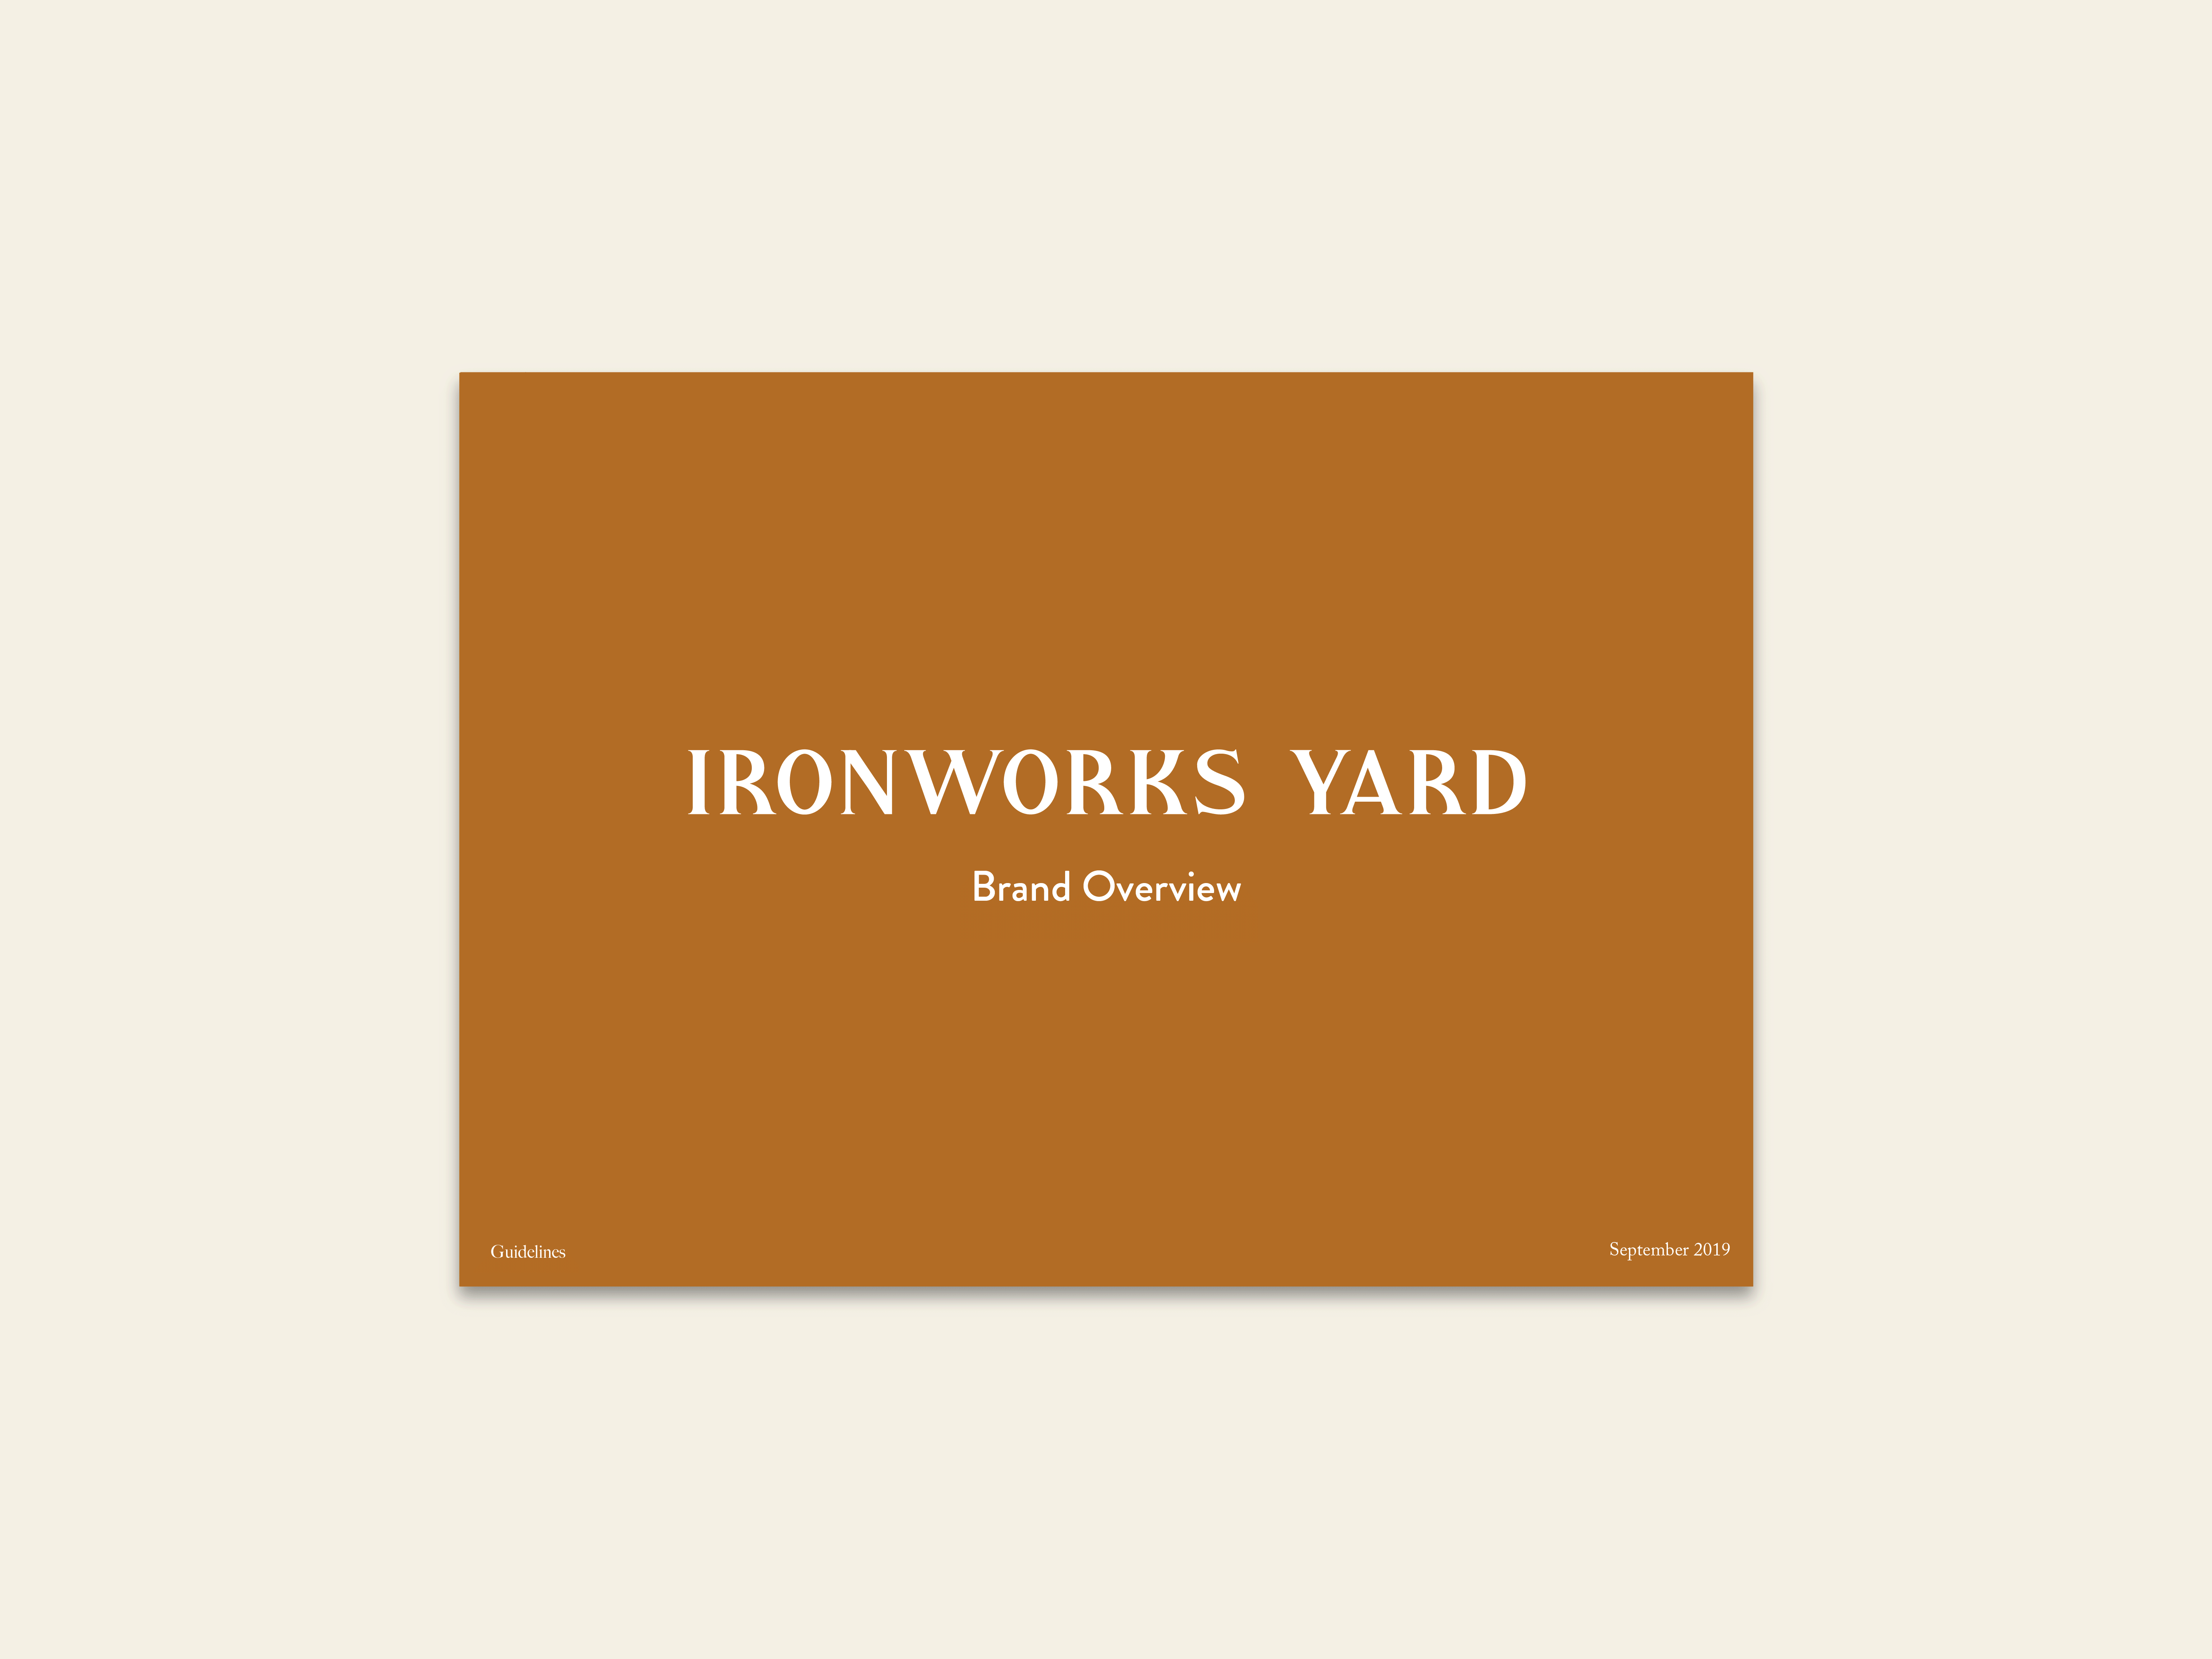 A GIF of the Ironworks Brand Guidelines flicking through the pages.